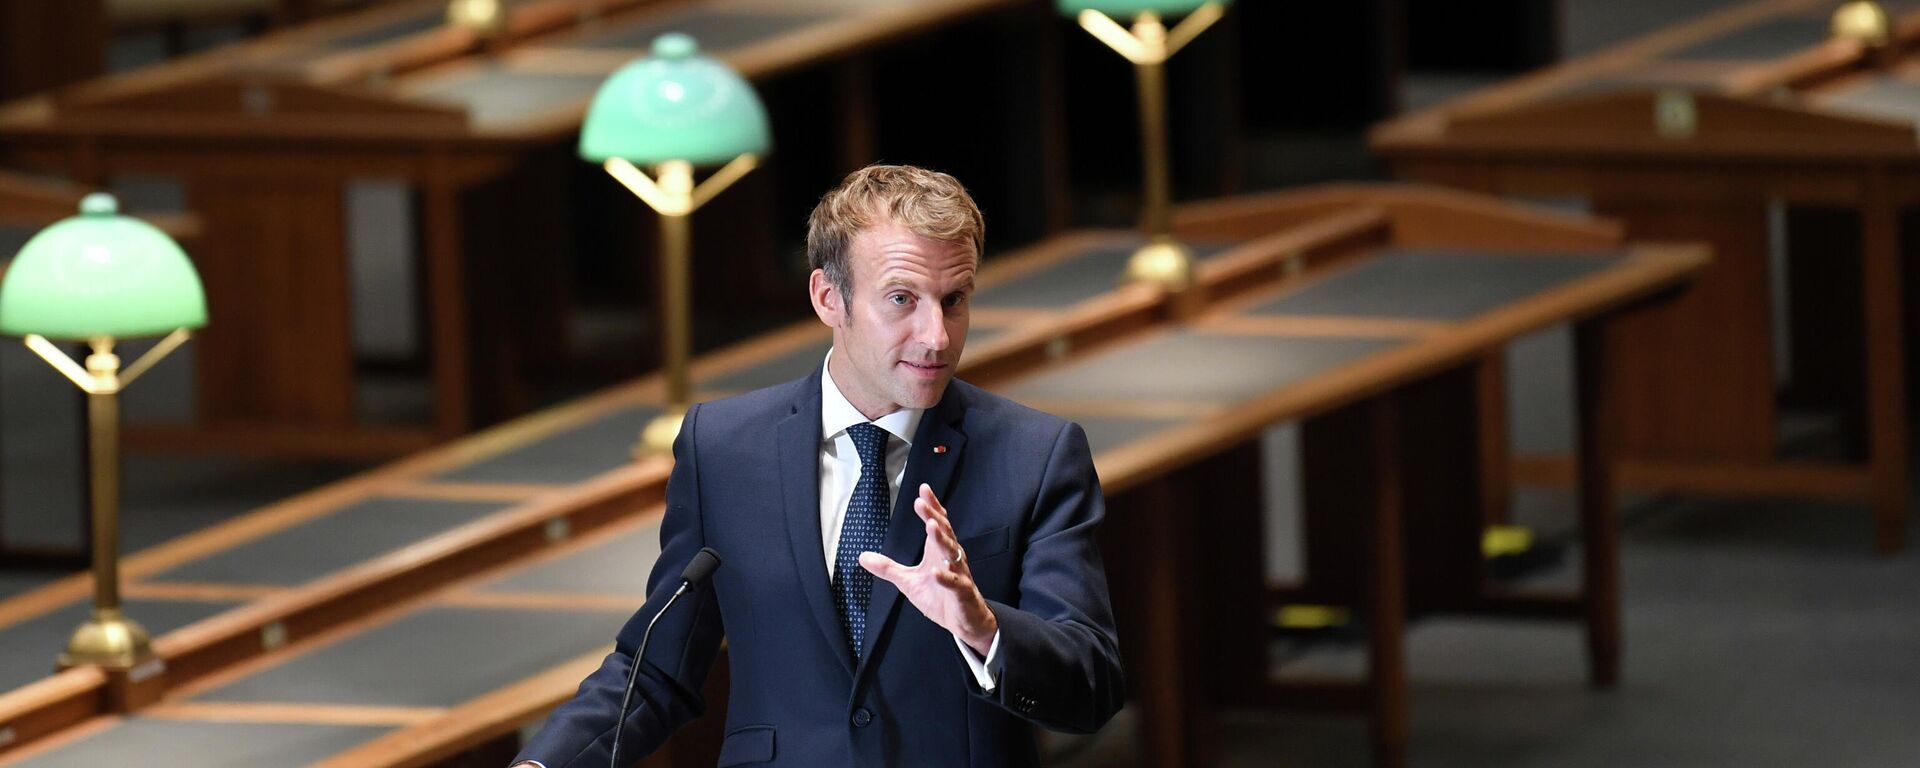 French President Emmanuel Macron delivers a speech at the Richelieu site of the Bibliotheque Nationale de France, after the completion of the renovation project and the 300th anniversary of the installation of the royal collections, in Paris, France, September 28, 2021 - Sputnik International, 1920, 29.09.2021